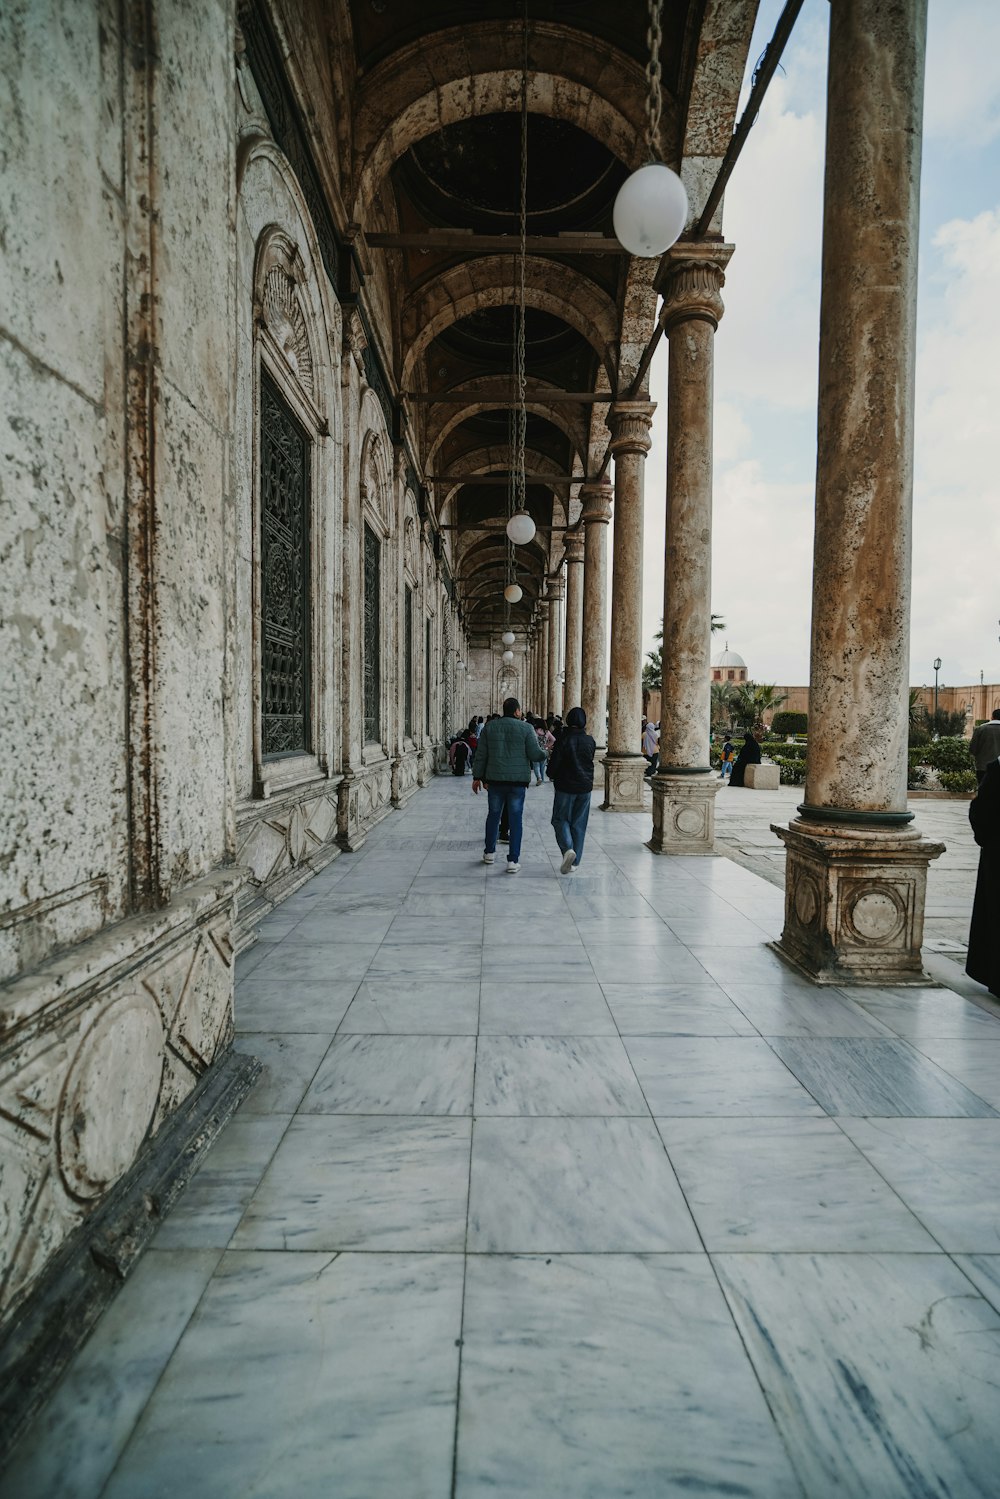 a group of people walking down a sidewalk next to tall pillars